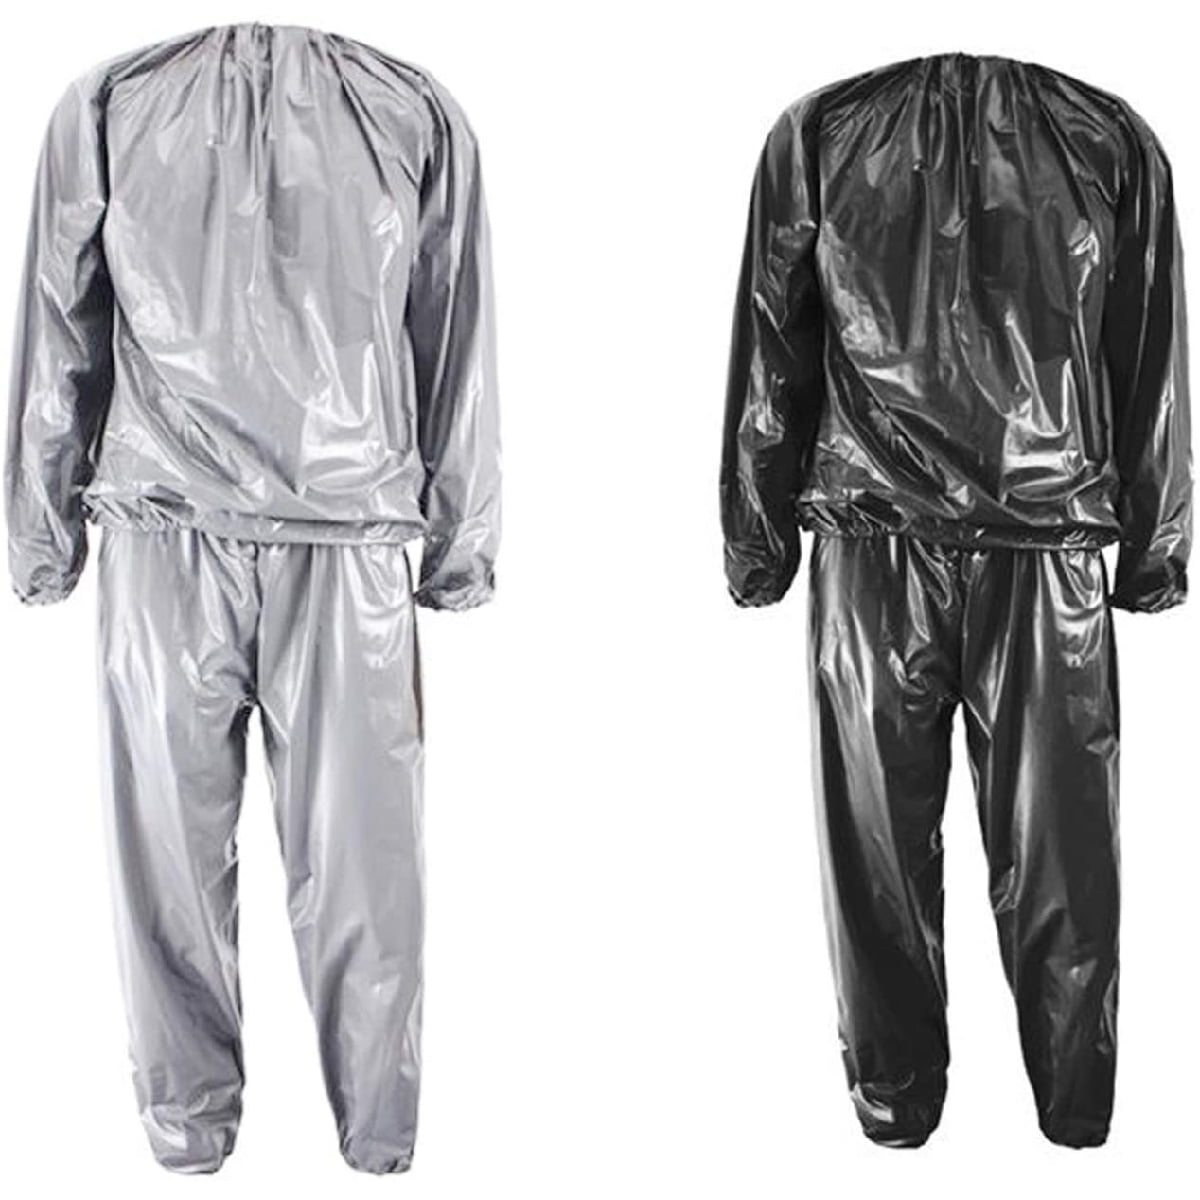 NEW Capelli Deluxe Sauna Suit Size SM/MD Small Medium Big Weight Loss Unisex 